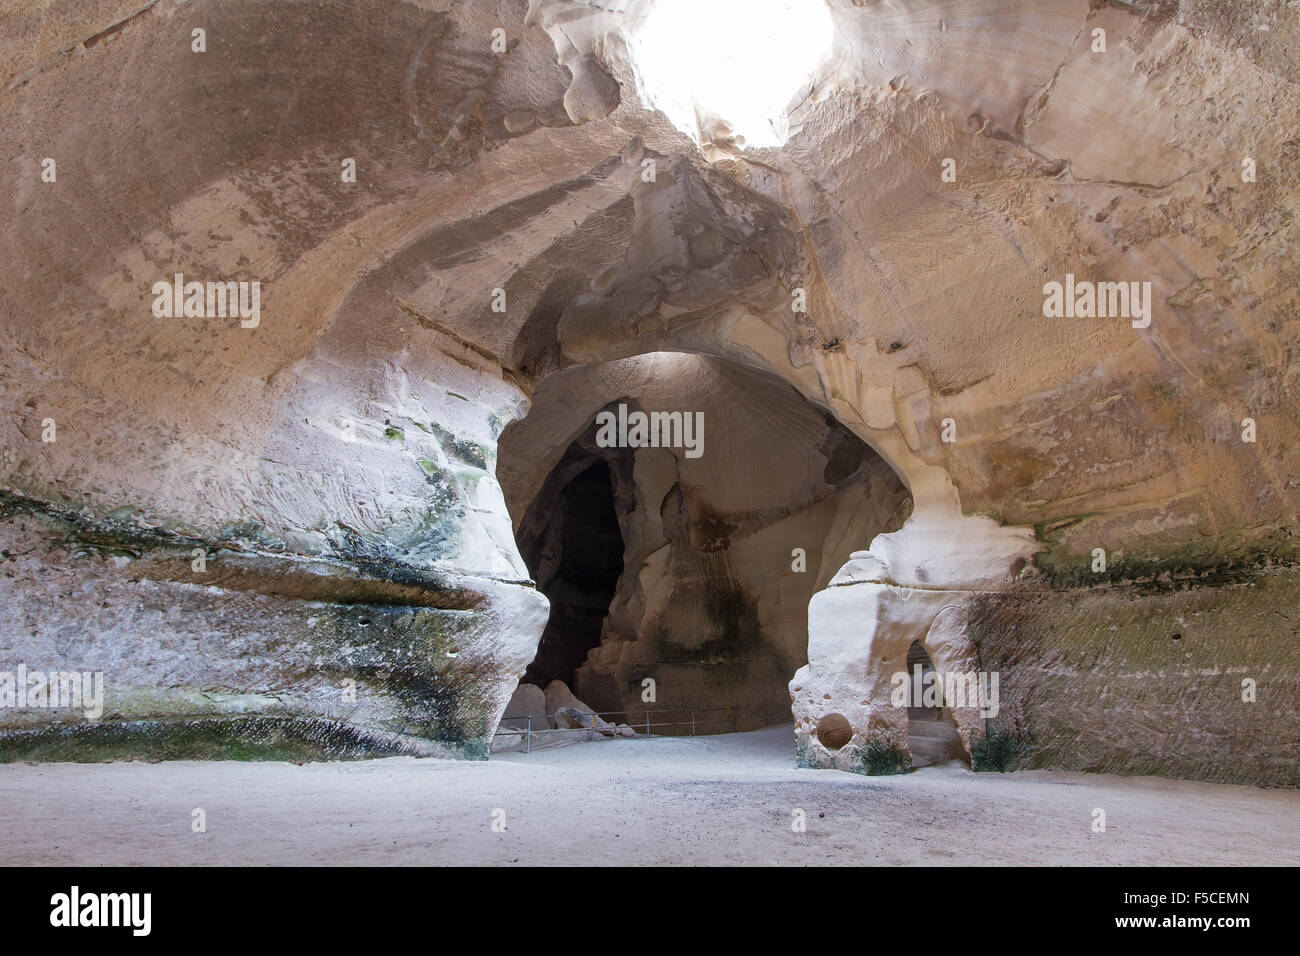 Cave ar Bet Guvrin national park. Israel. Stock Photo